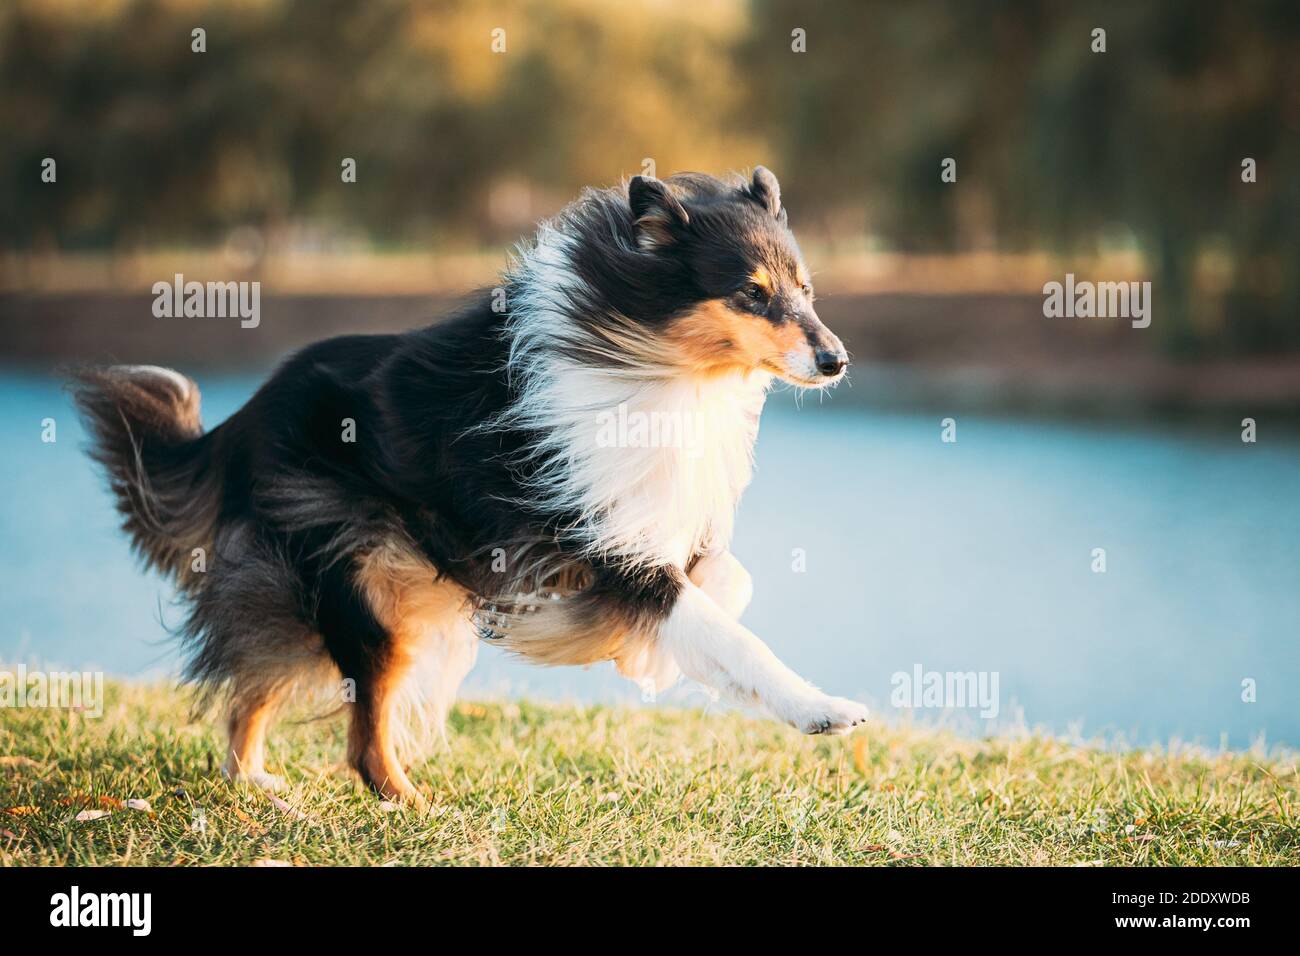 Rough Collie, Funny Scottish Collie, Long-Haired Collie, English Collie, Lassie Dog che corre all'aperto Foto Stock